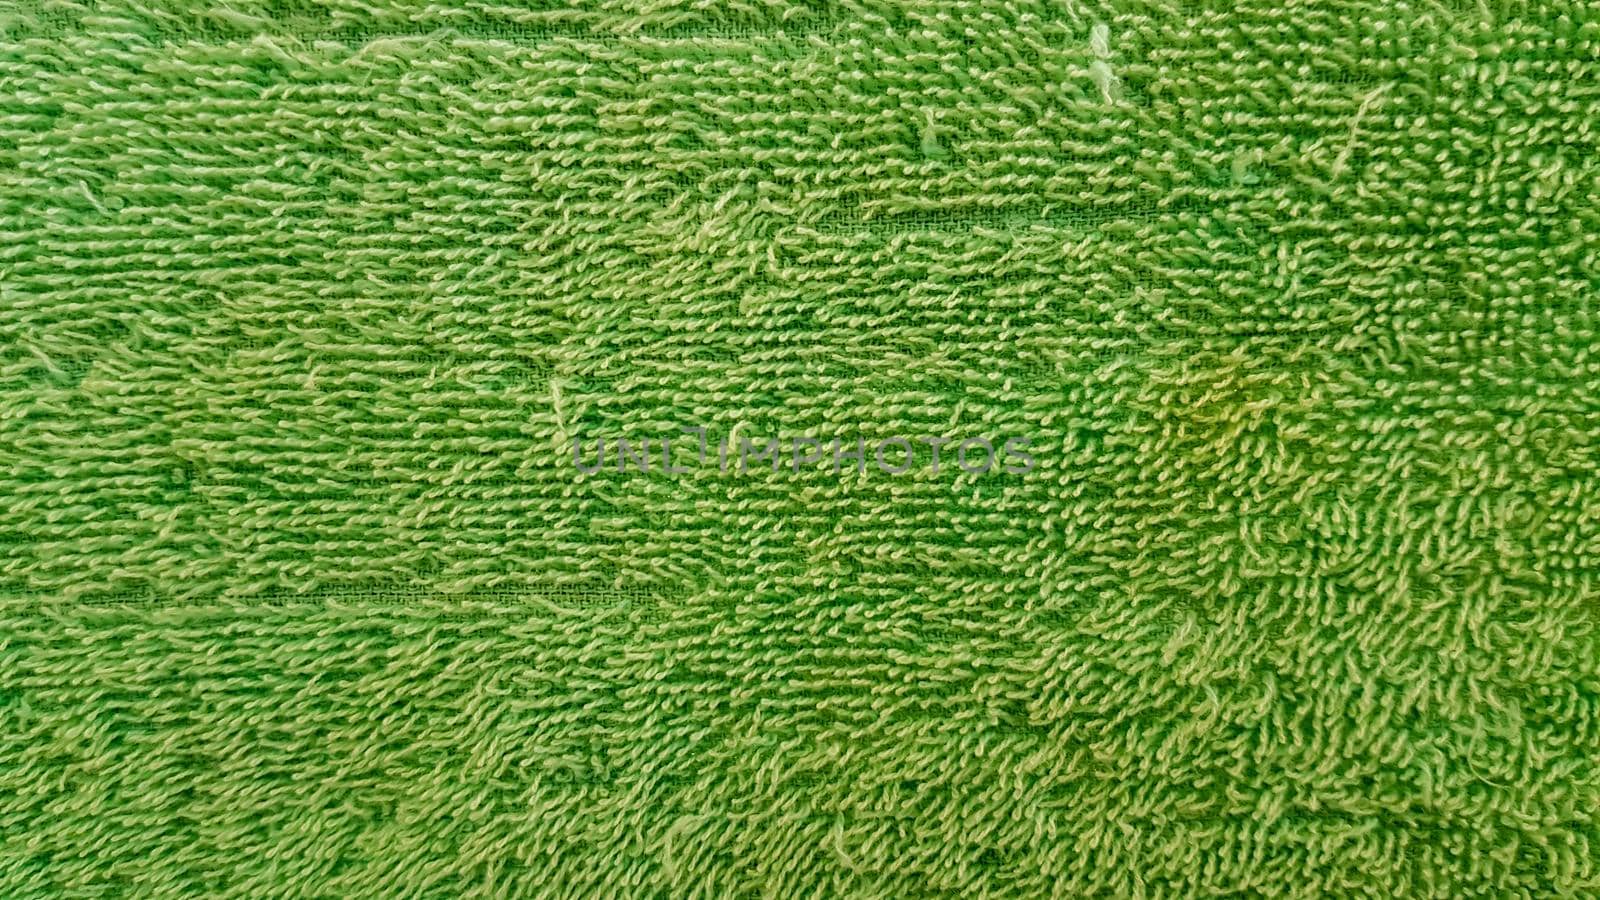 green old towel texture for background The fabric or textile is made up of cotton fiber material, looks fluffy, dry, soft. by pichai25